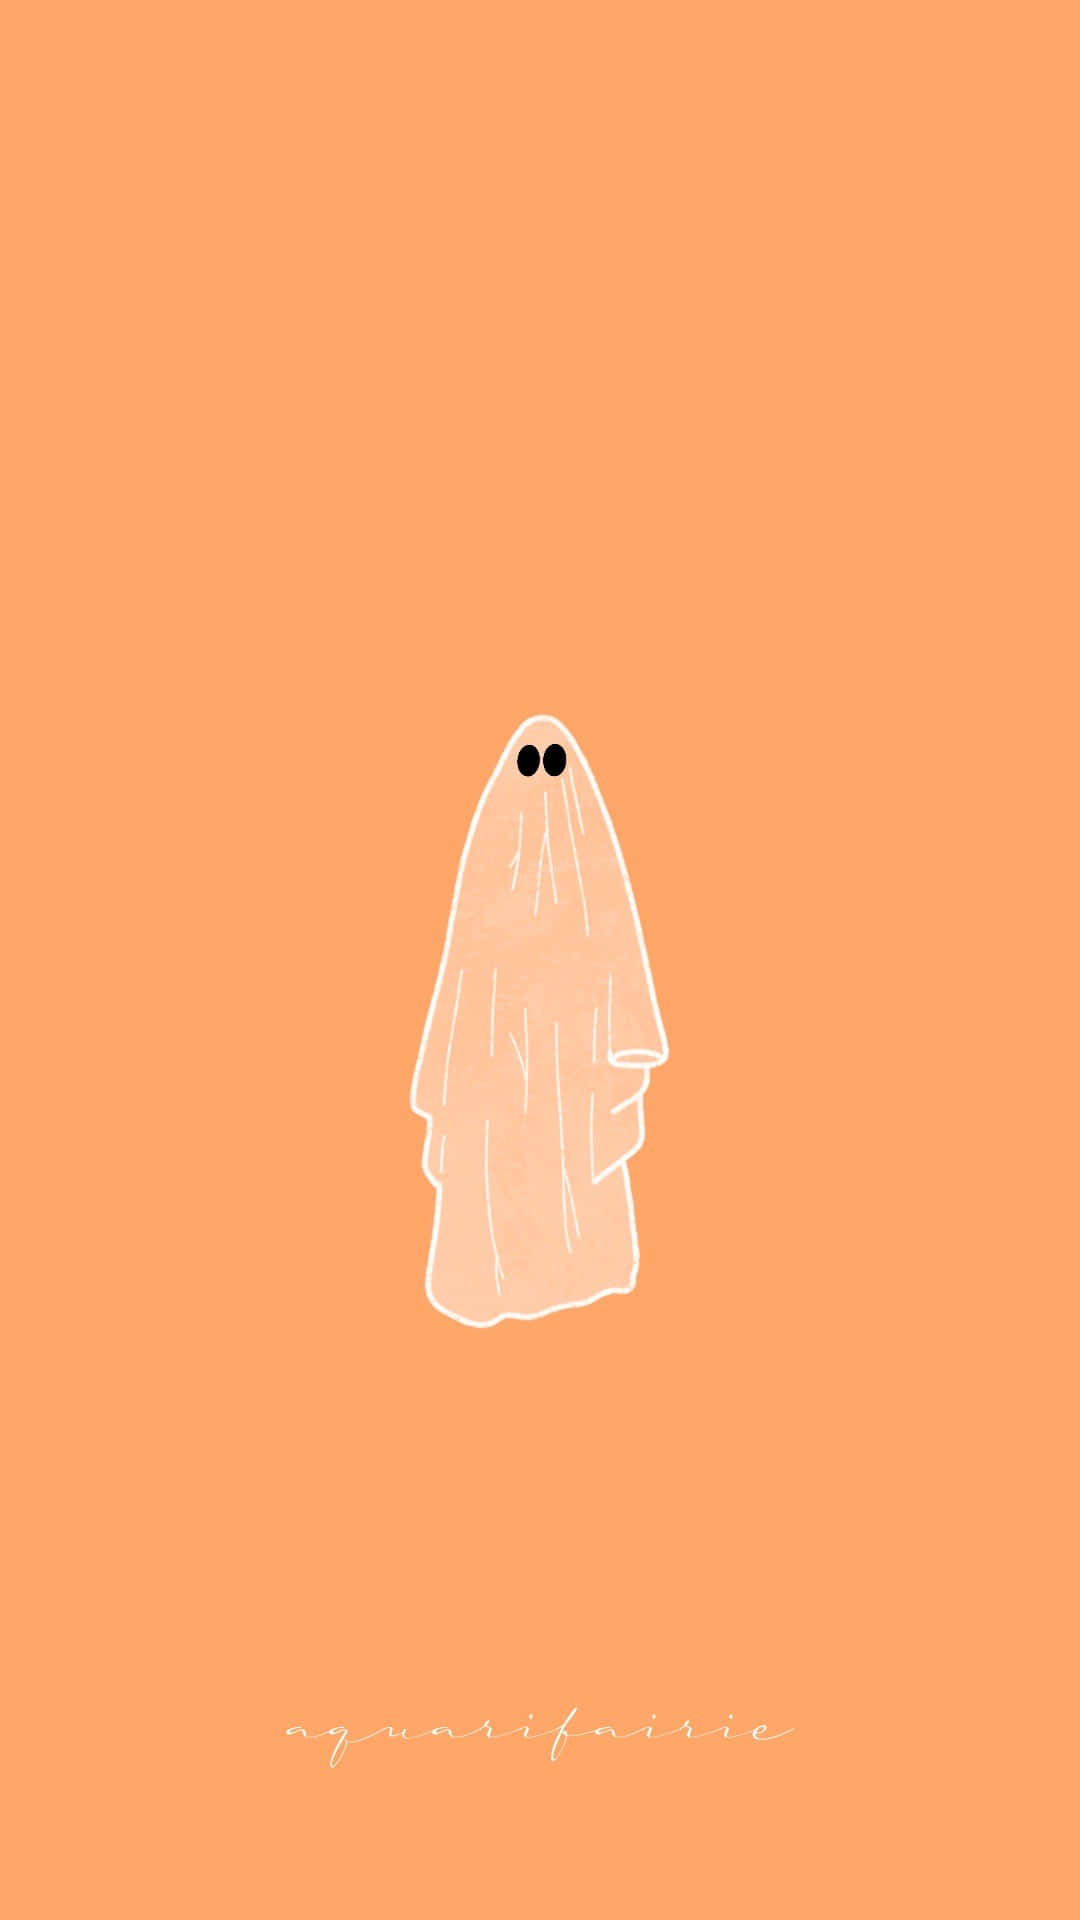 A Ghost On An Orange Background Wallpaper